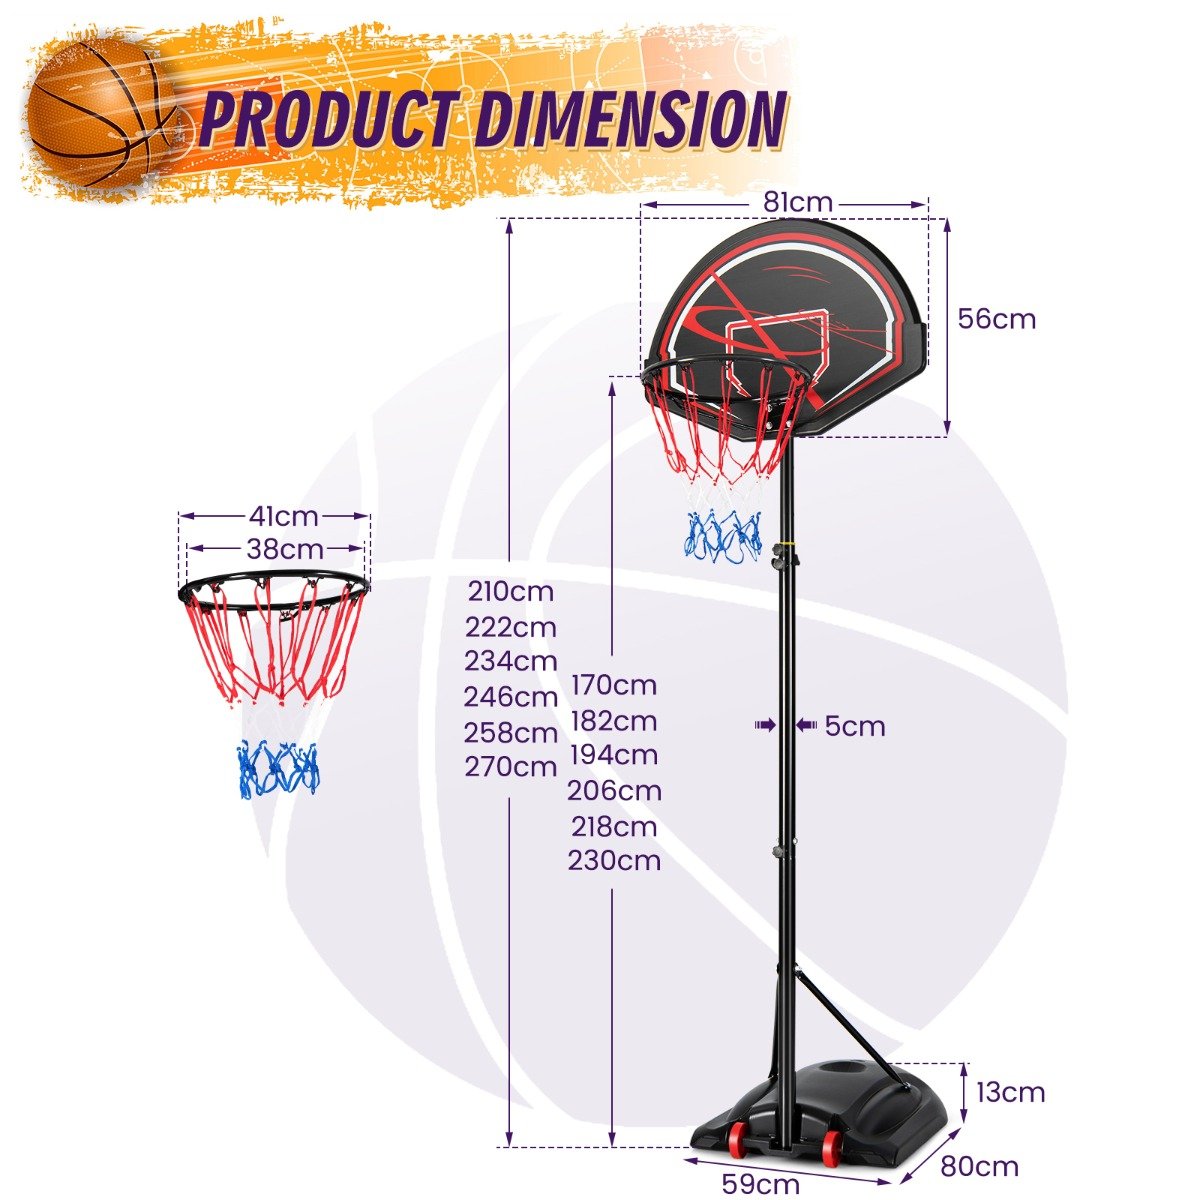 Get Ready to Shoot Hoops - Buy Your System Now!